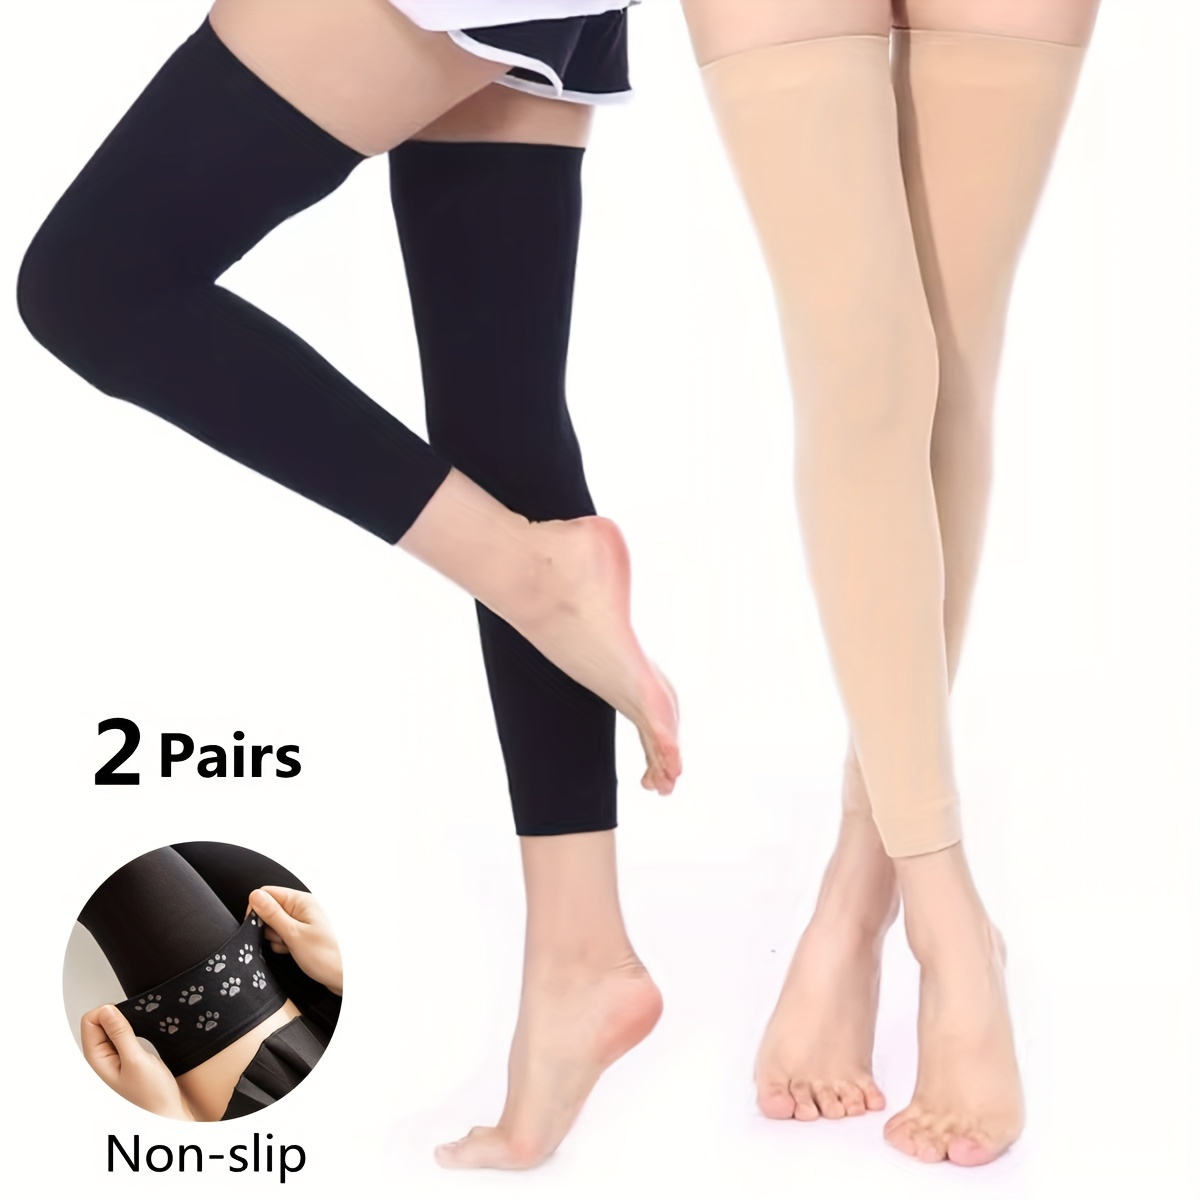 

2 Pairs Non-slip Unisex Compression Socks, Women's Thin Over The Knee Socks, Leg Warmers For Spring Summer Protection